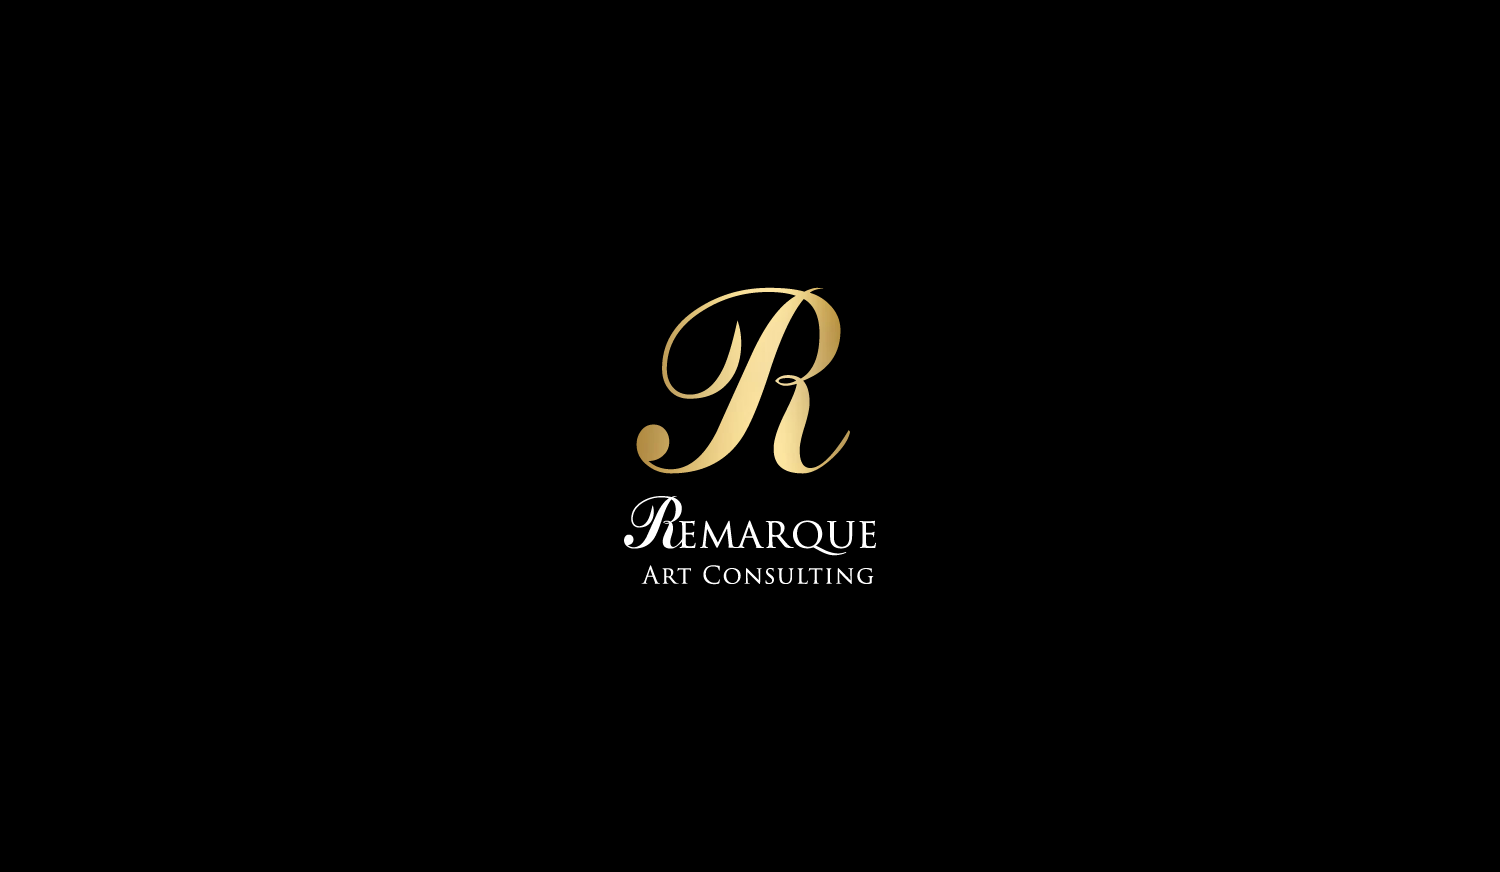 Remarque Art Consulting